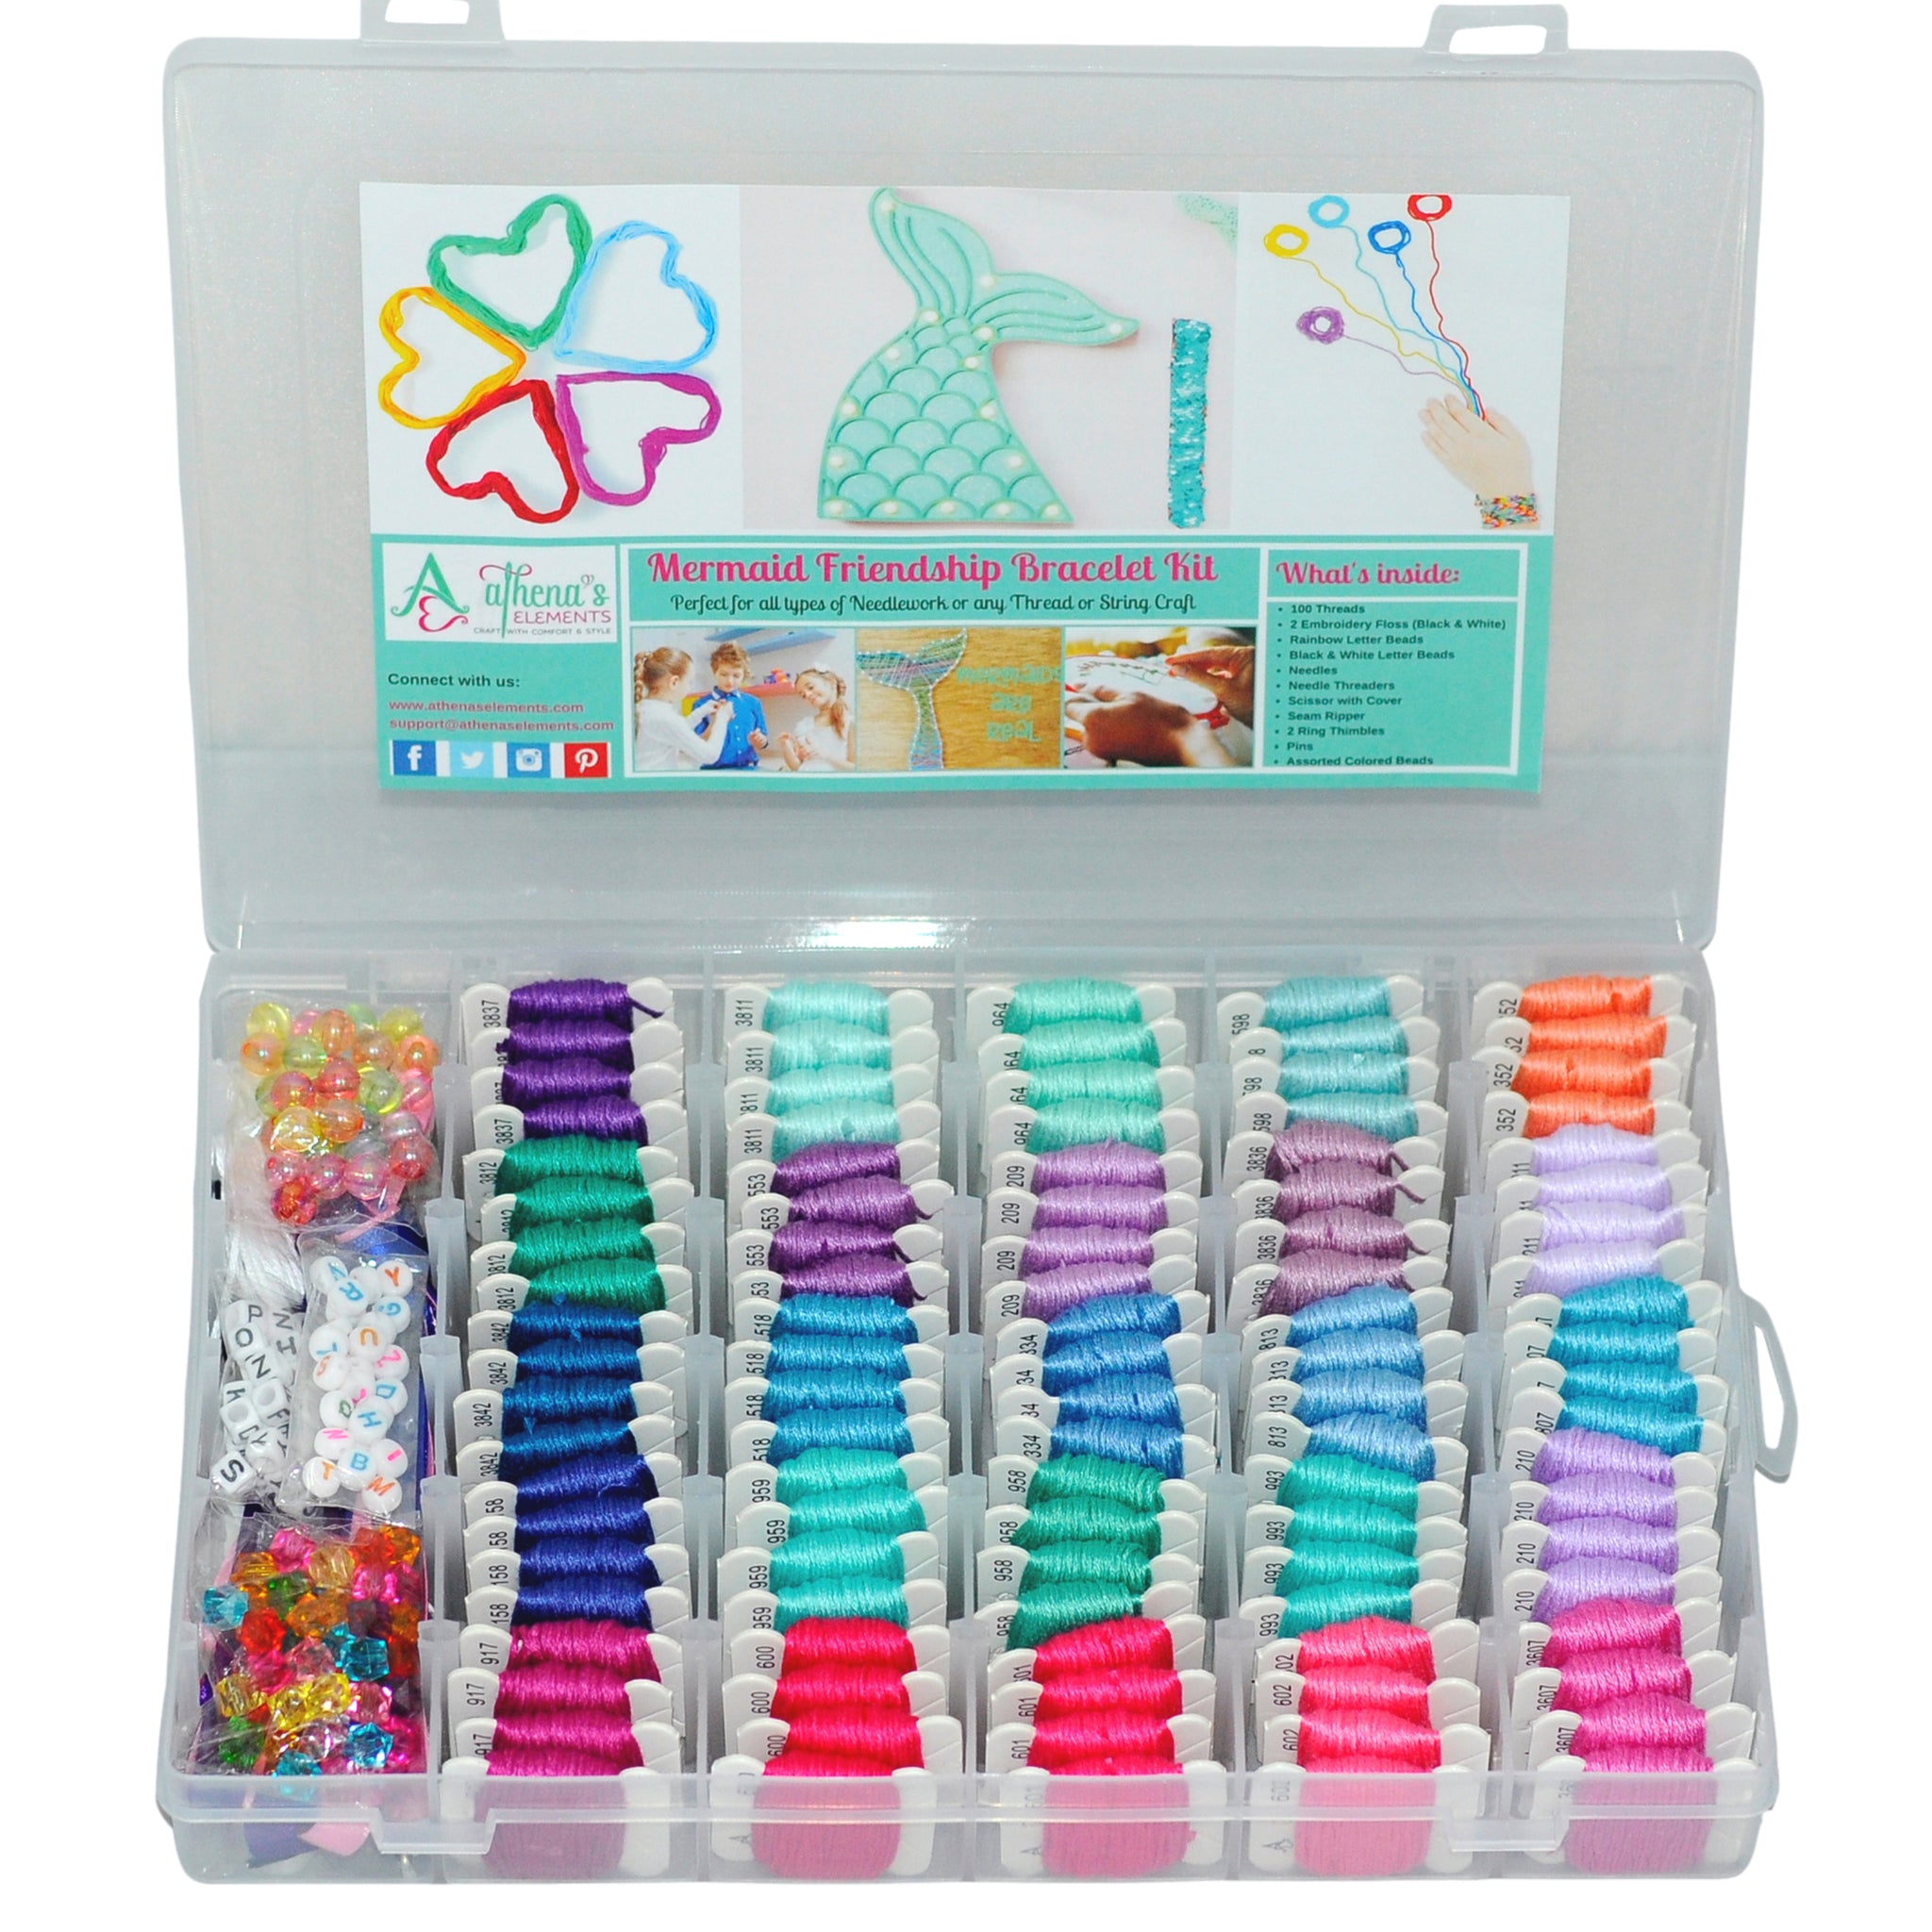 Athena's Elements Embroidery Floss Friendship Bracelet String Kit - 276pcs  Embroidery Thread and Accessories - Colors are Labeled